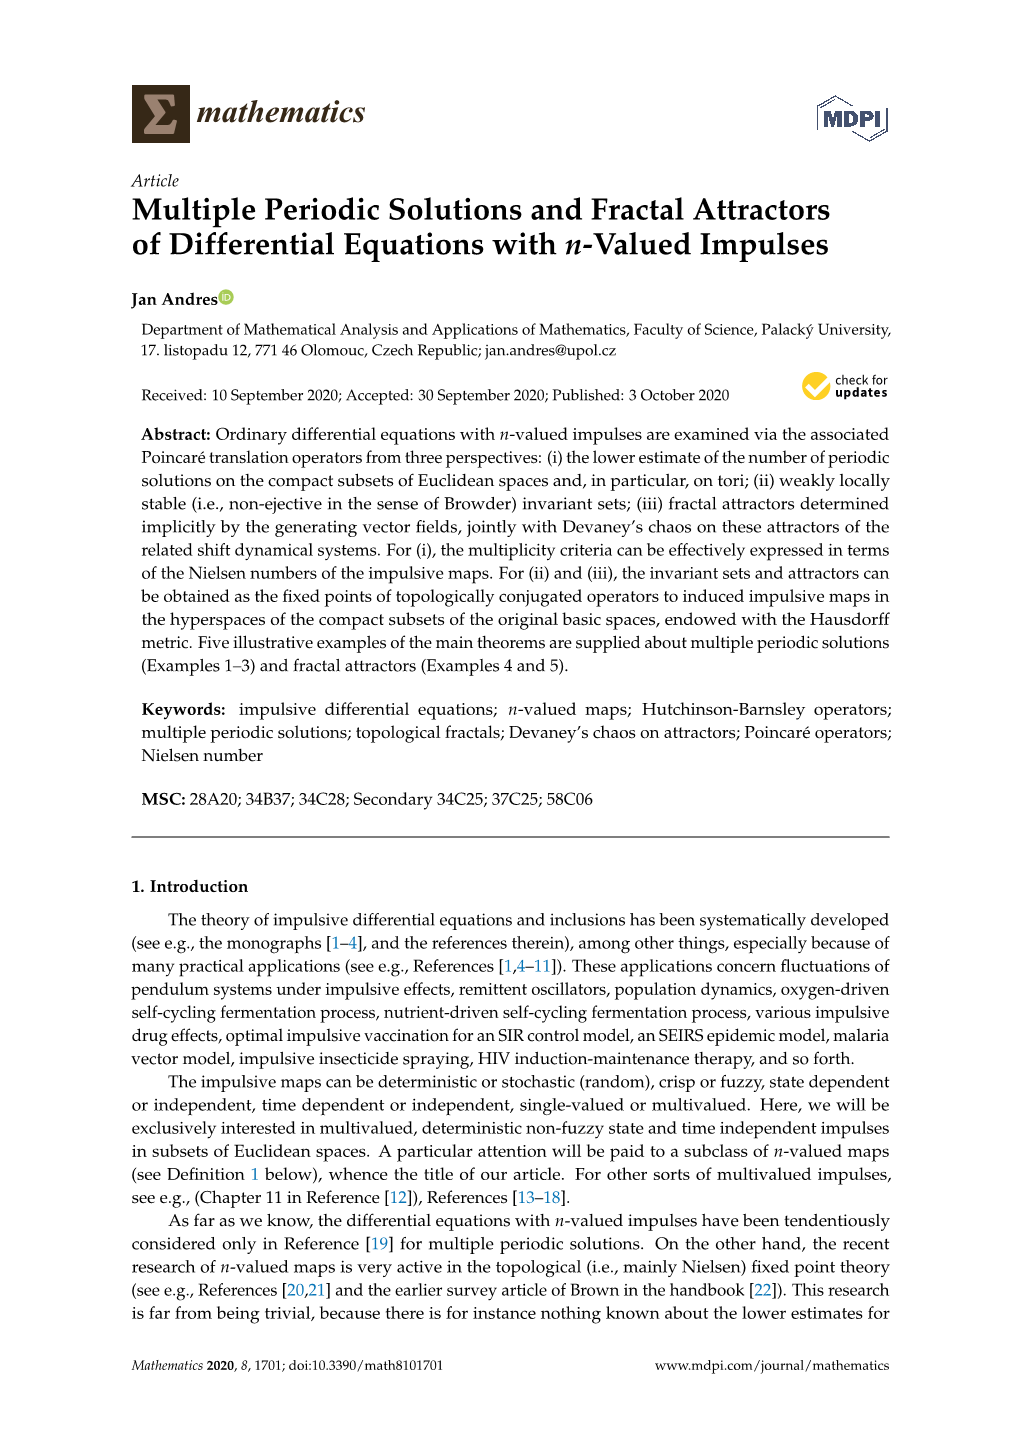 Multiple Periodic Solutions and Fractal Attractors of Differential Equations with N-Valued Impulses